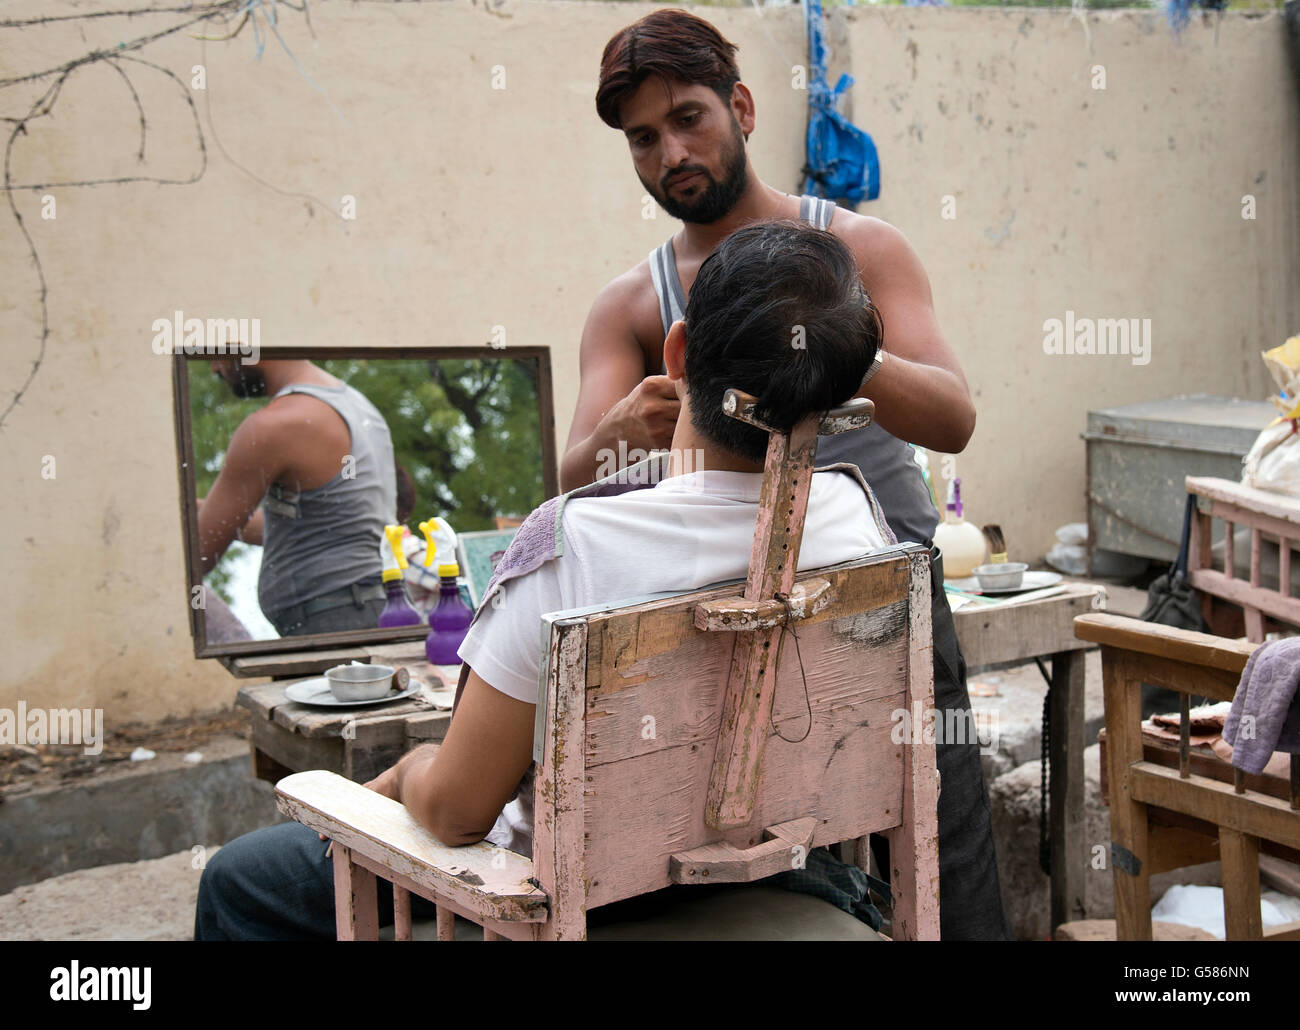 The image of Roadside Barber was taken in Sawai Madhopur in Rajasthan India Stock Photo